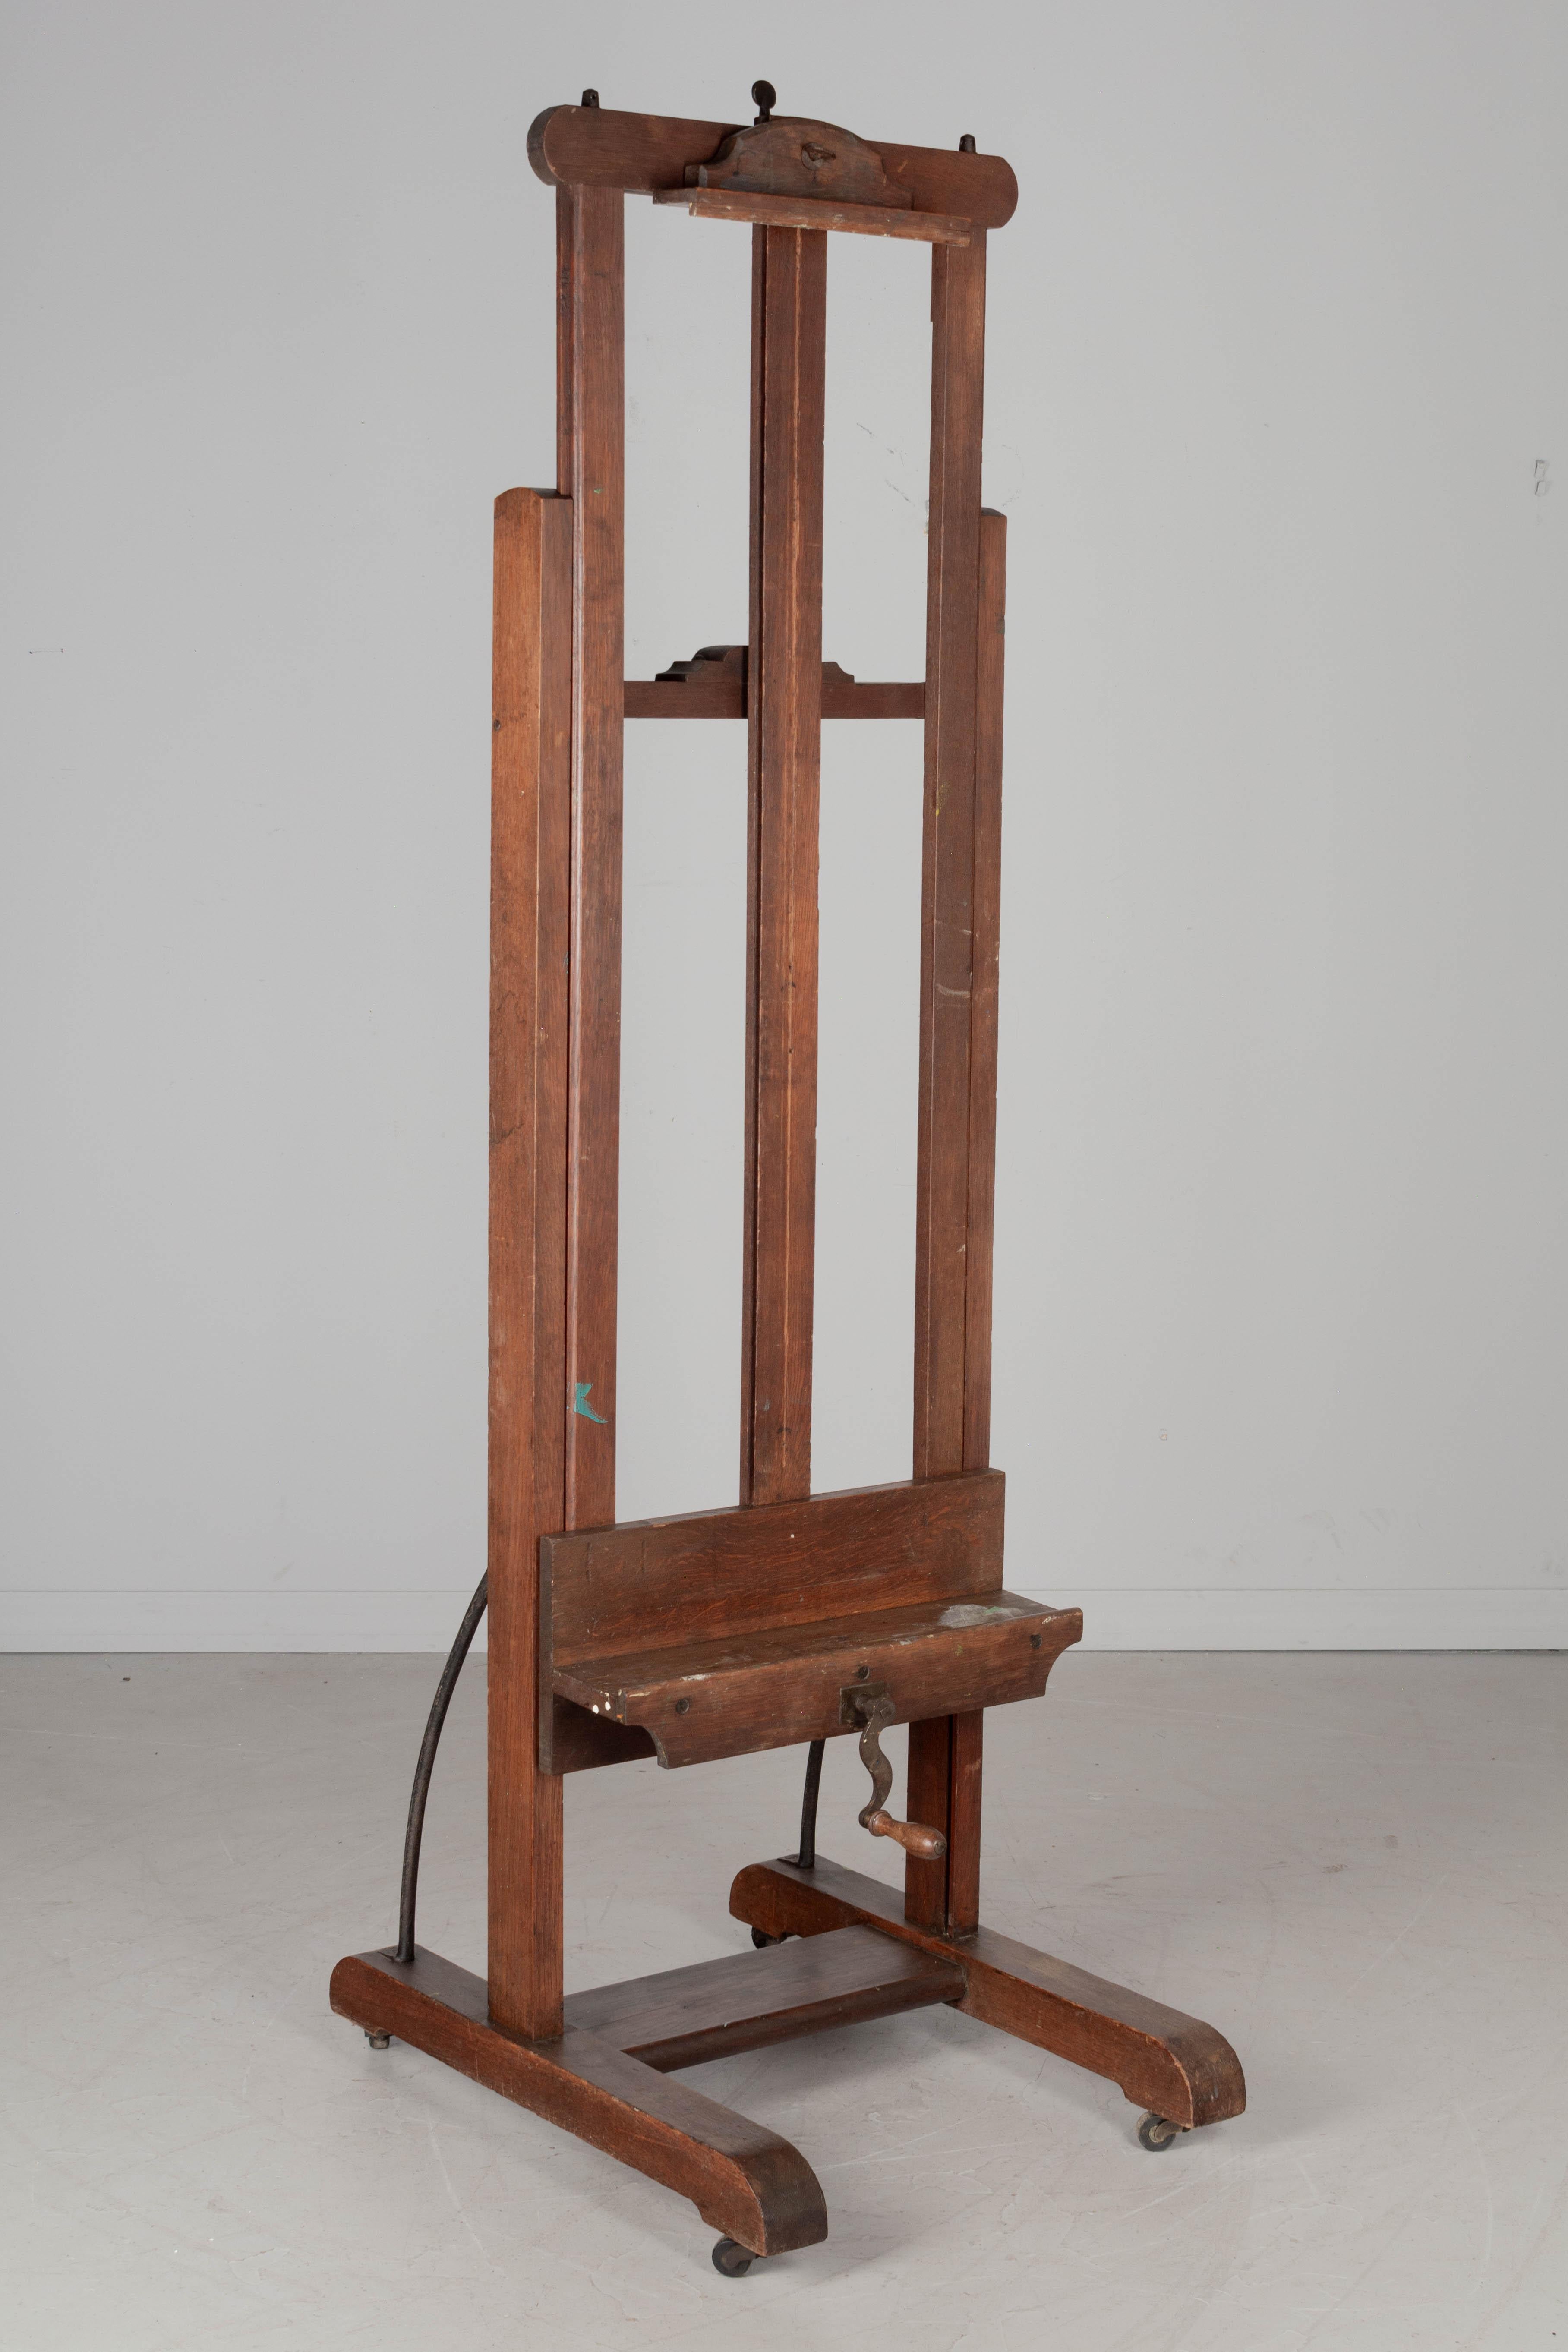 A large early 20th Century French painter's easel made of solid oak with threaded iron rod, cast iron gear and metal crank with turned wood handle. Ledge with remnants of spattered paint. Adjustable bracket at the top securely holds the painting or